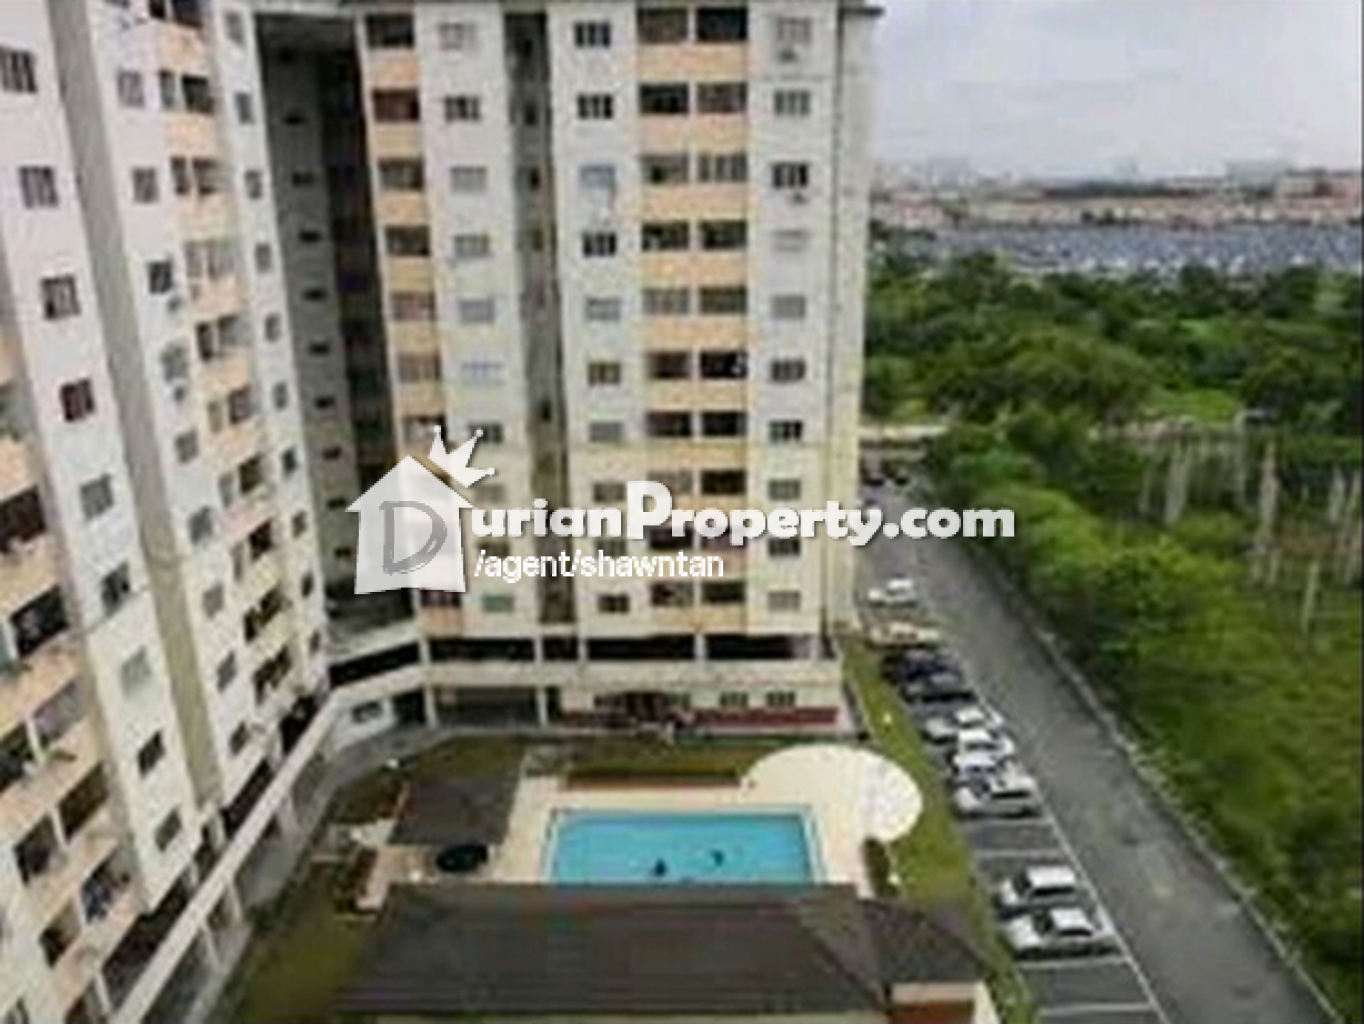 Apartment For Sale At Intan Apartment Taman Puchong Intan For Rm 250 000 By Shawn Tan Durianproperty